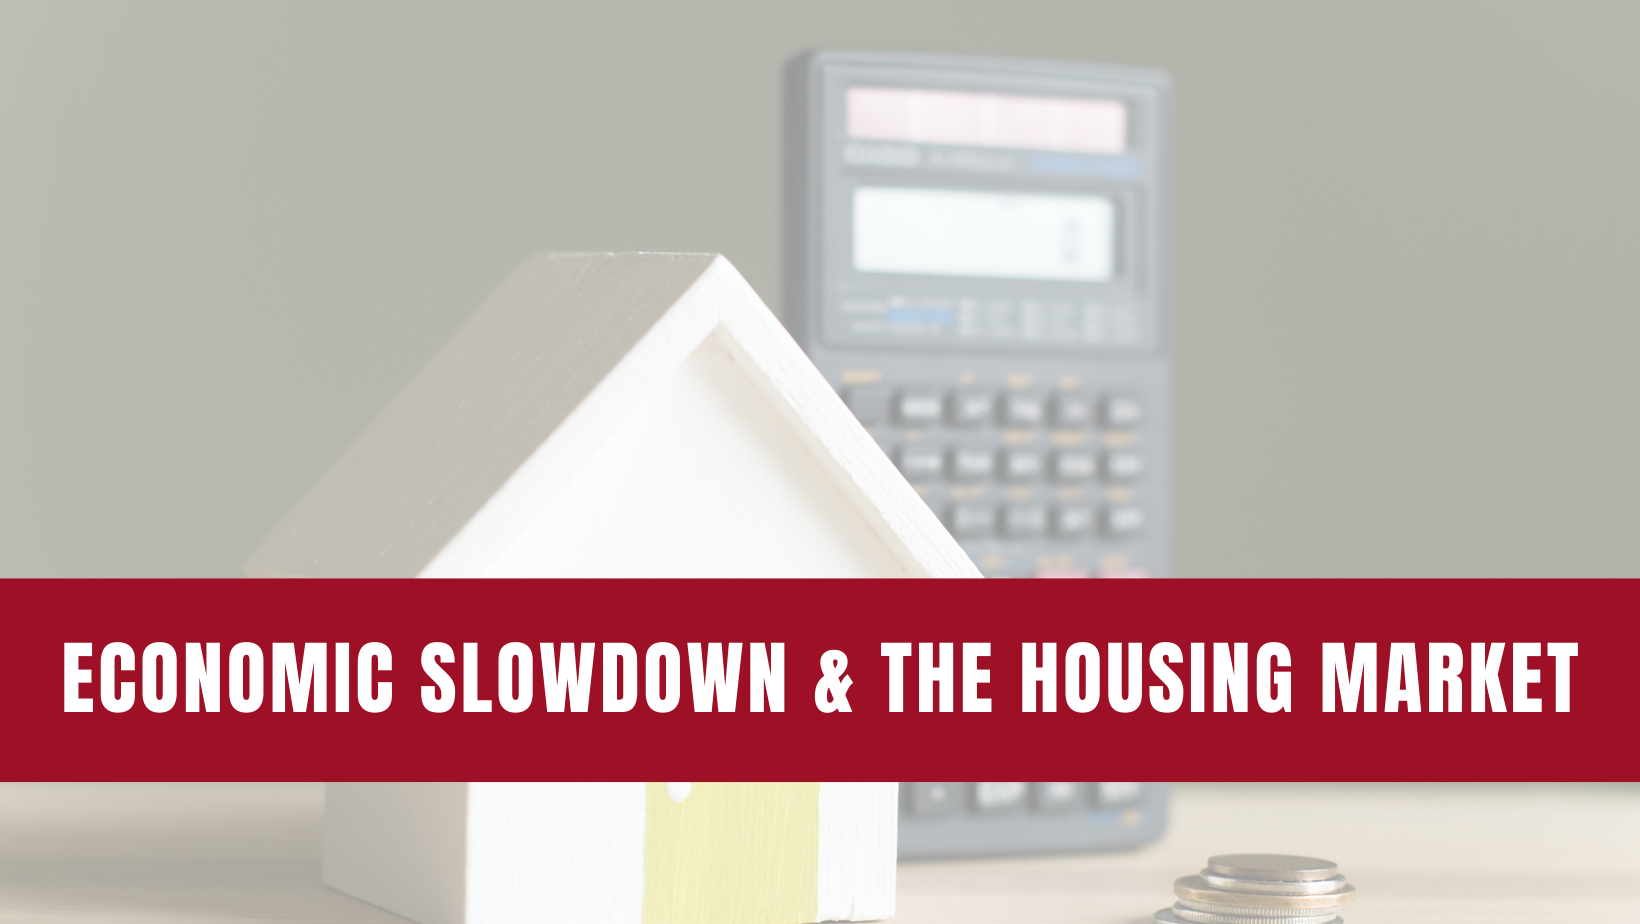 What Does An Economic Slowdown Mean For The Housing Market?